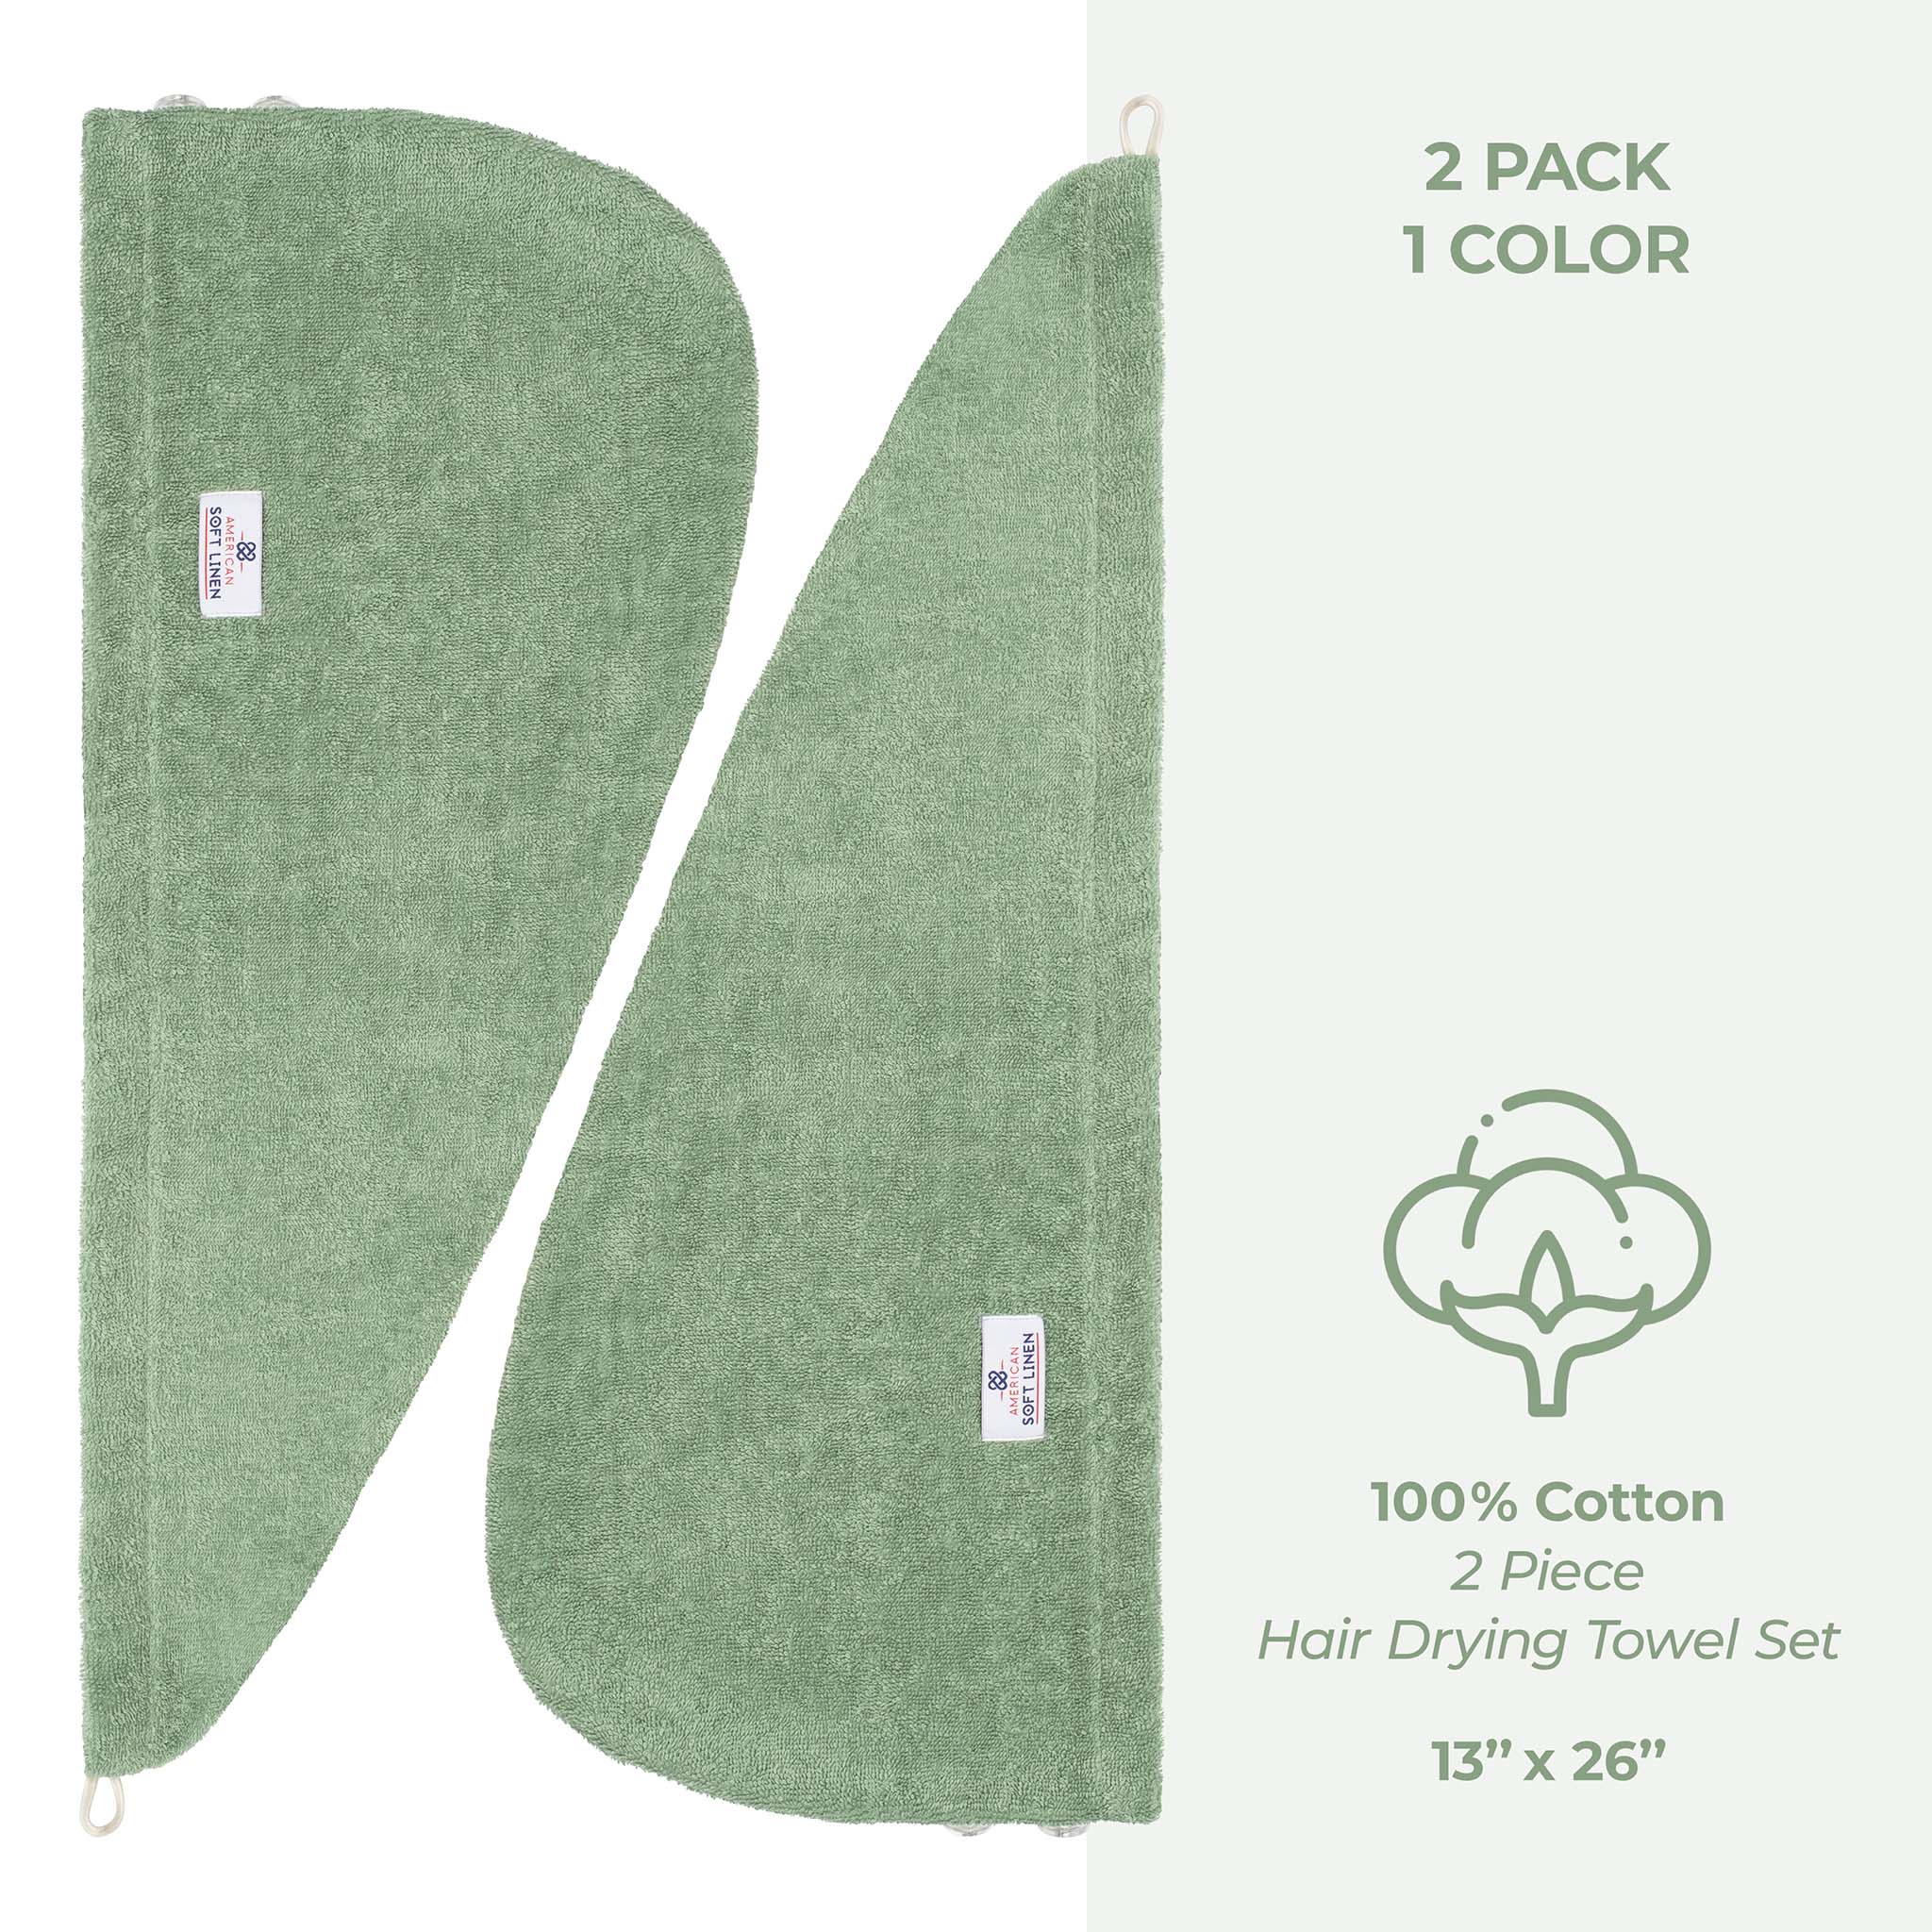 American Soft Linen 100% Cotton Hair Drying Towels for Women 2 pack 75 set case pack sage-green-4